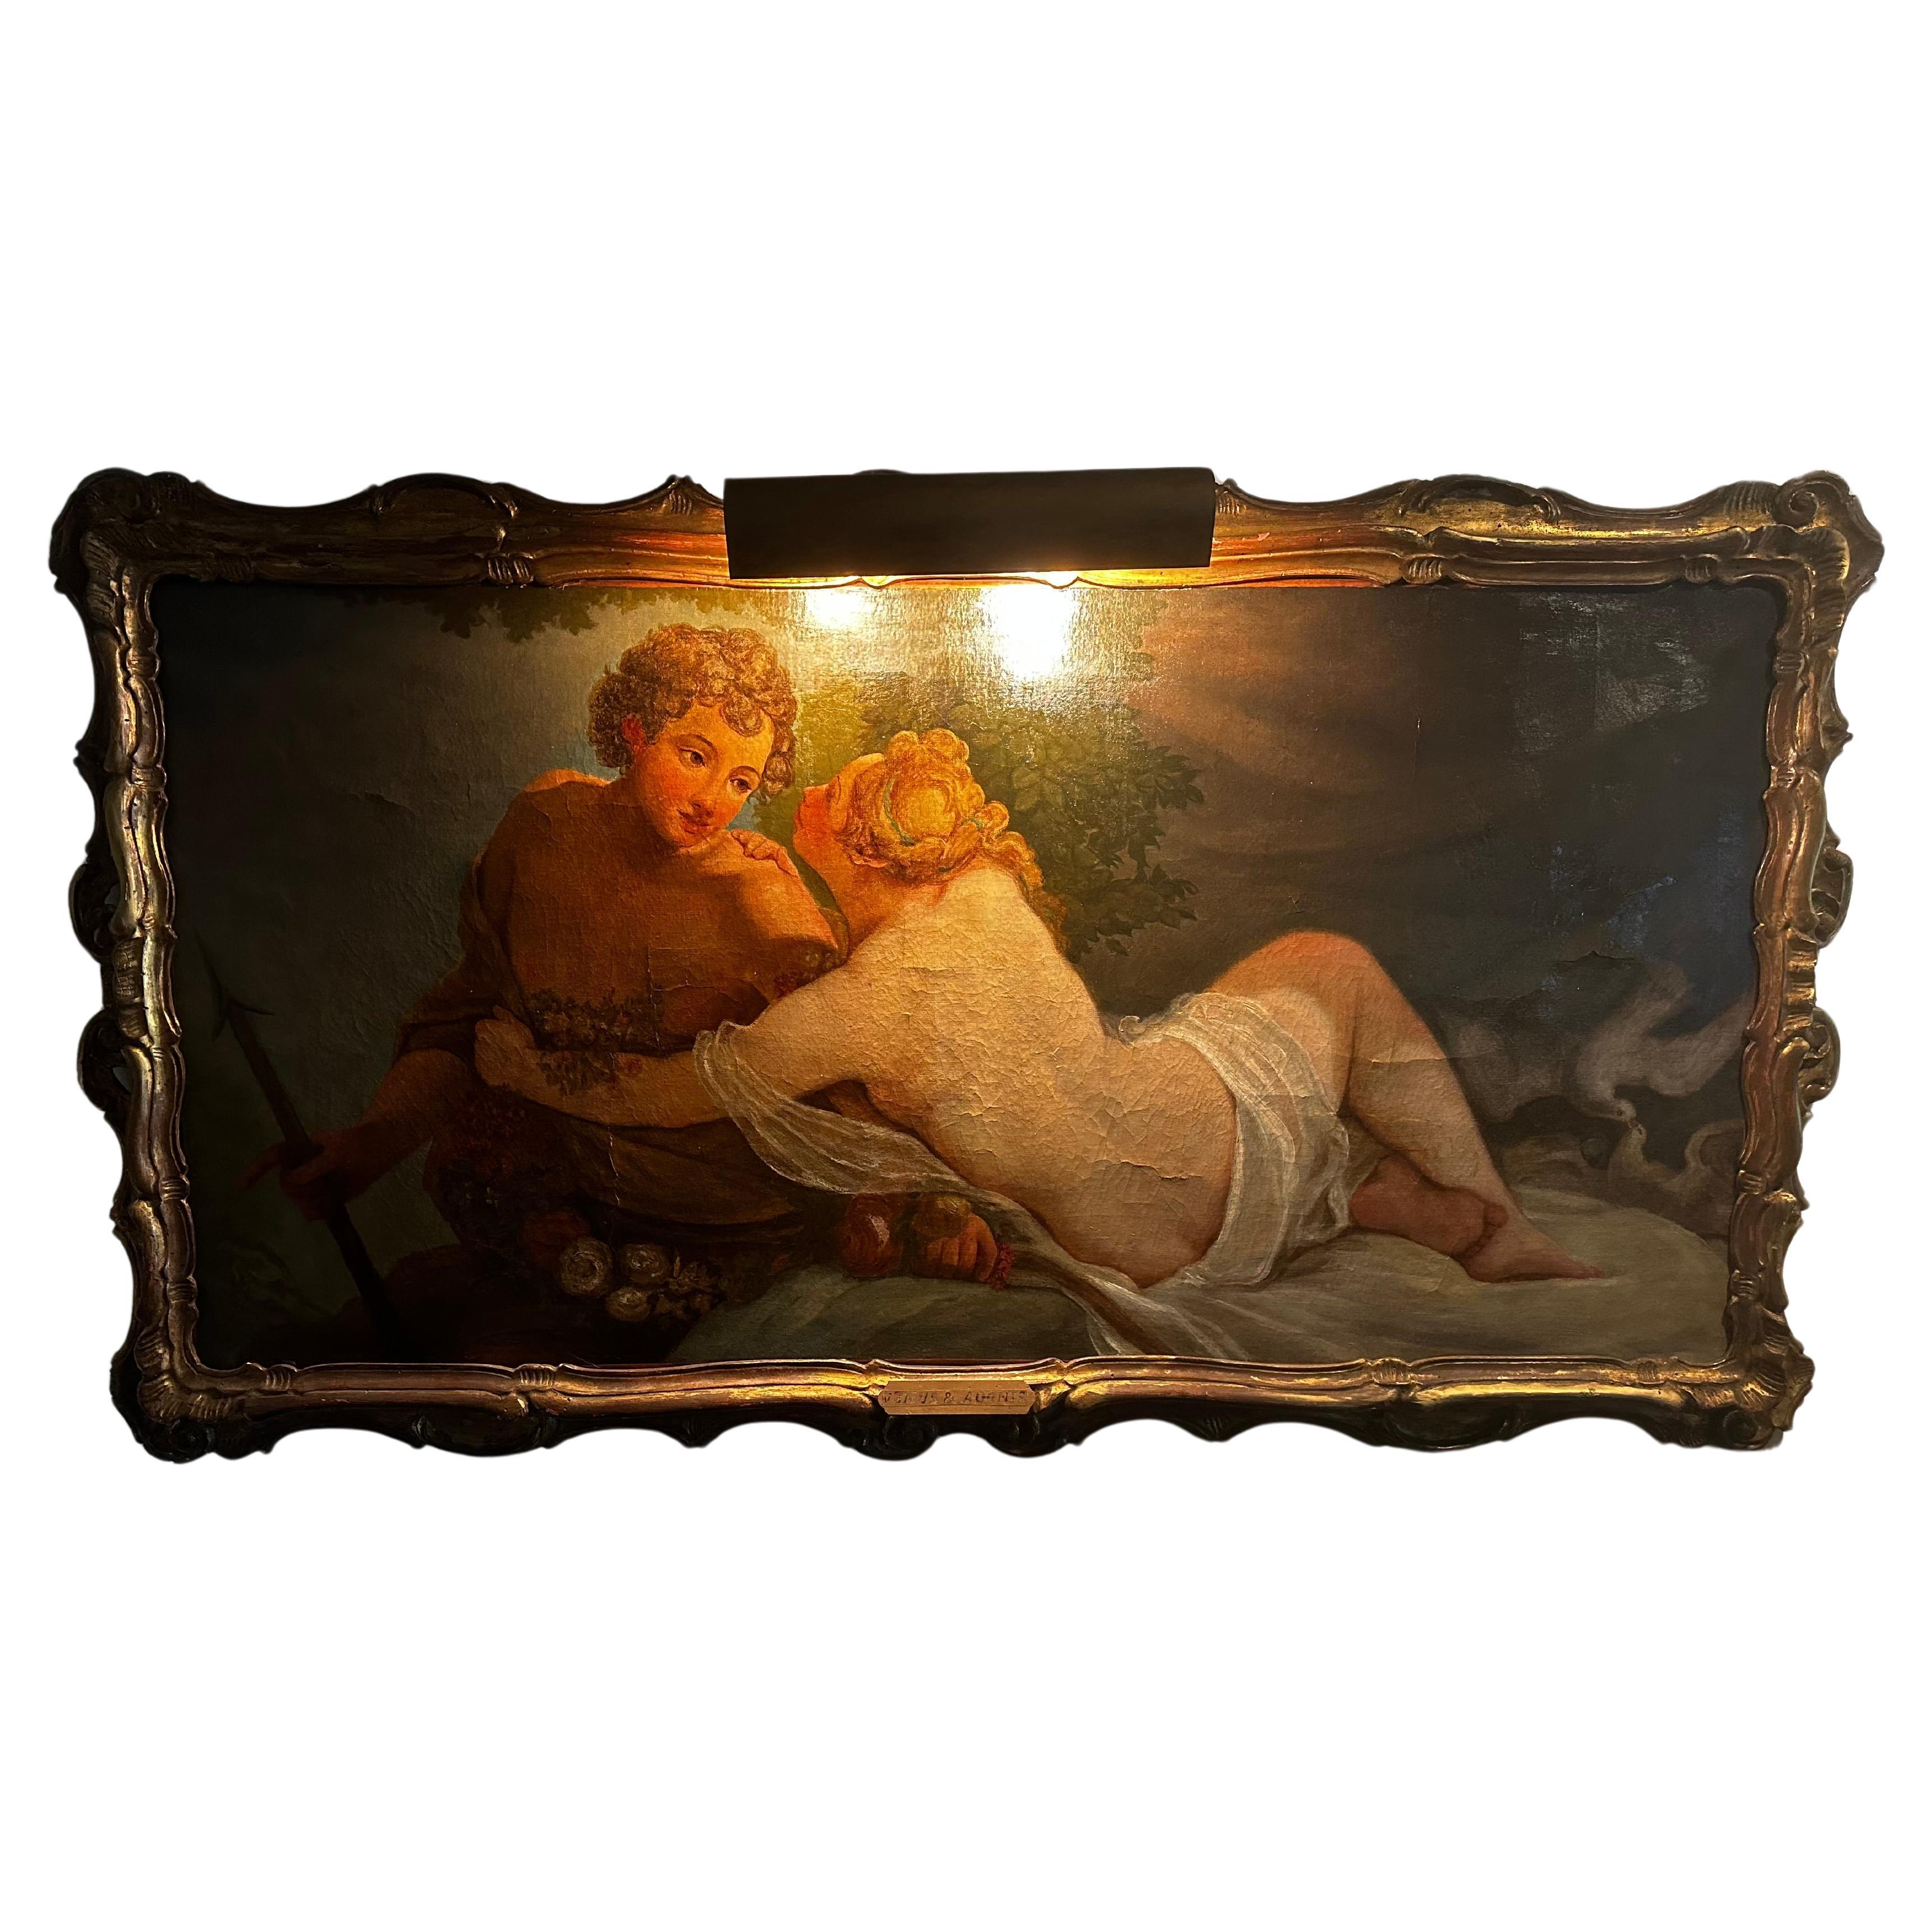 Large Antique Oil on Canvas of Venus & Adonis with Giltwood Frame